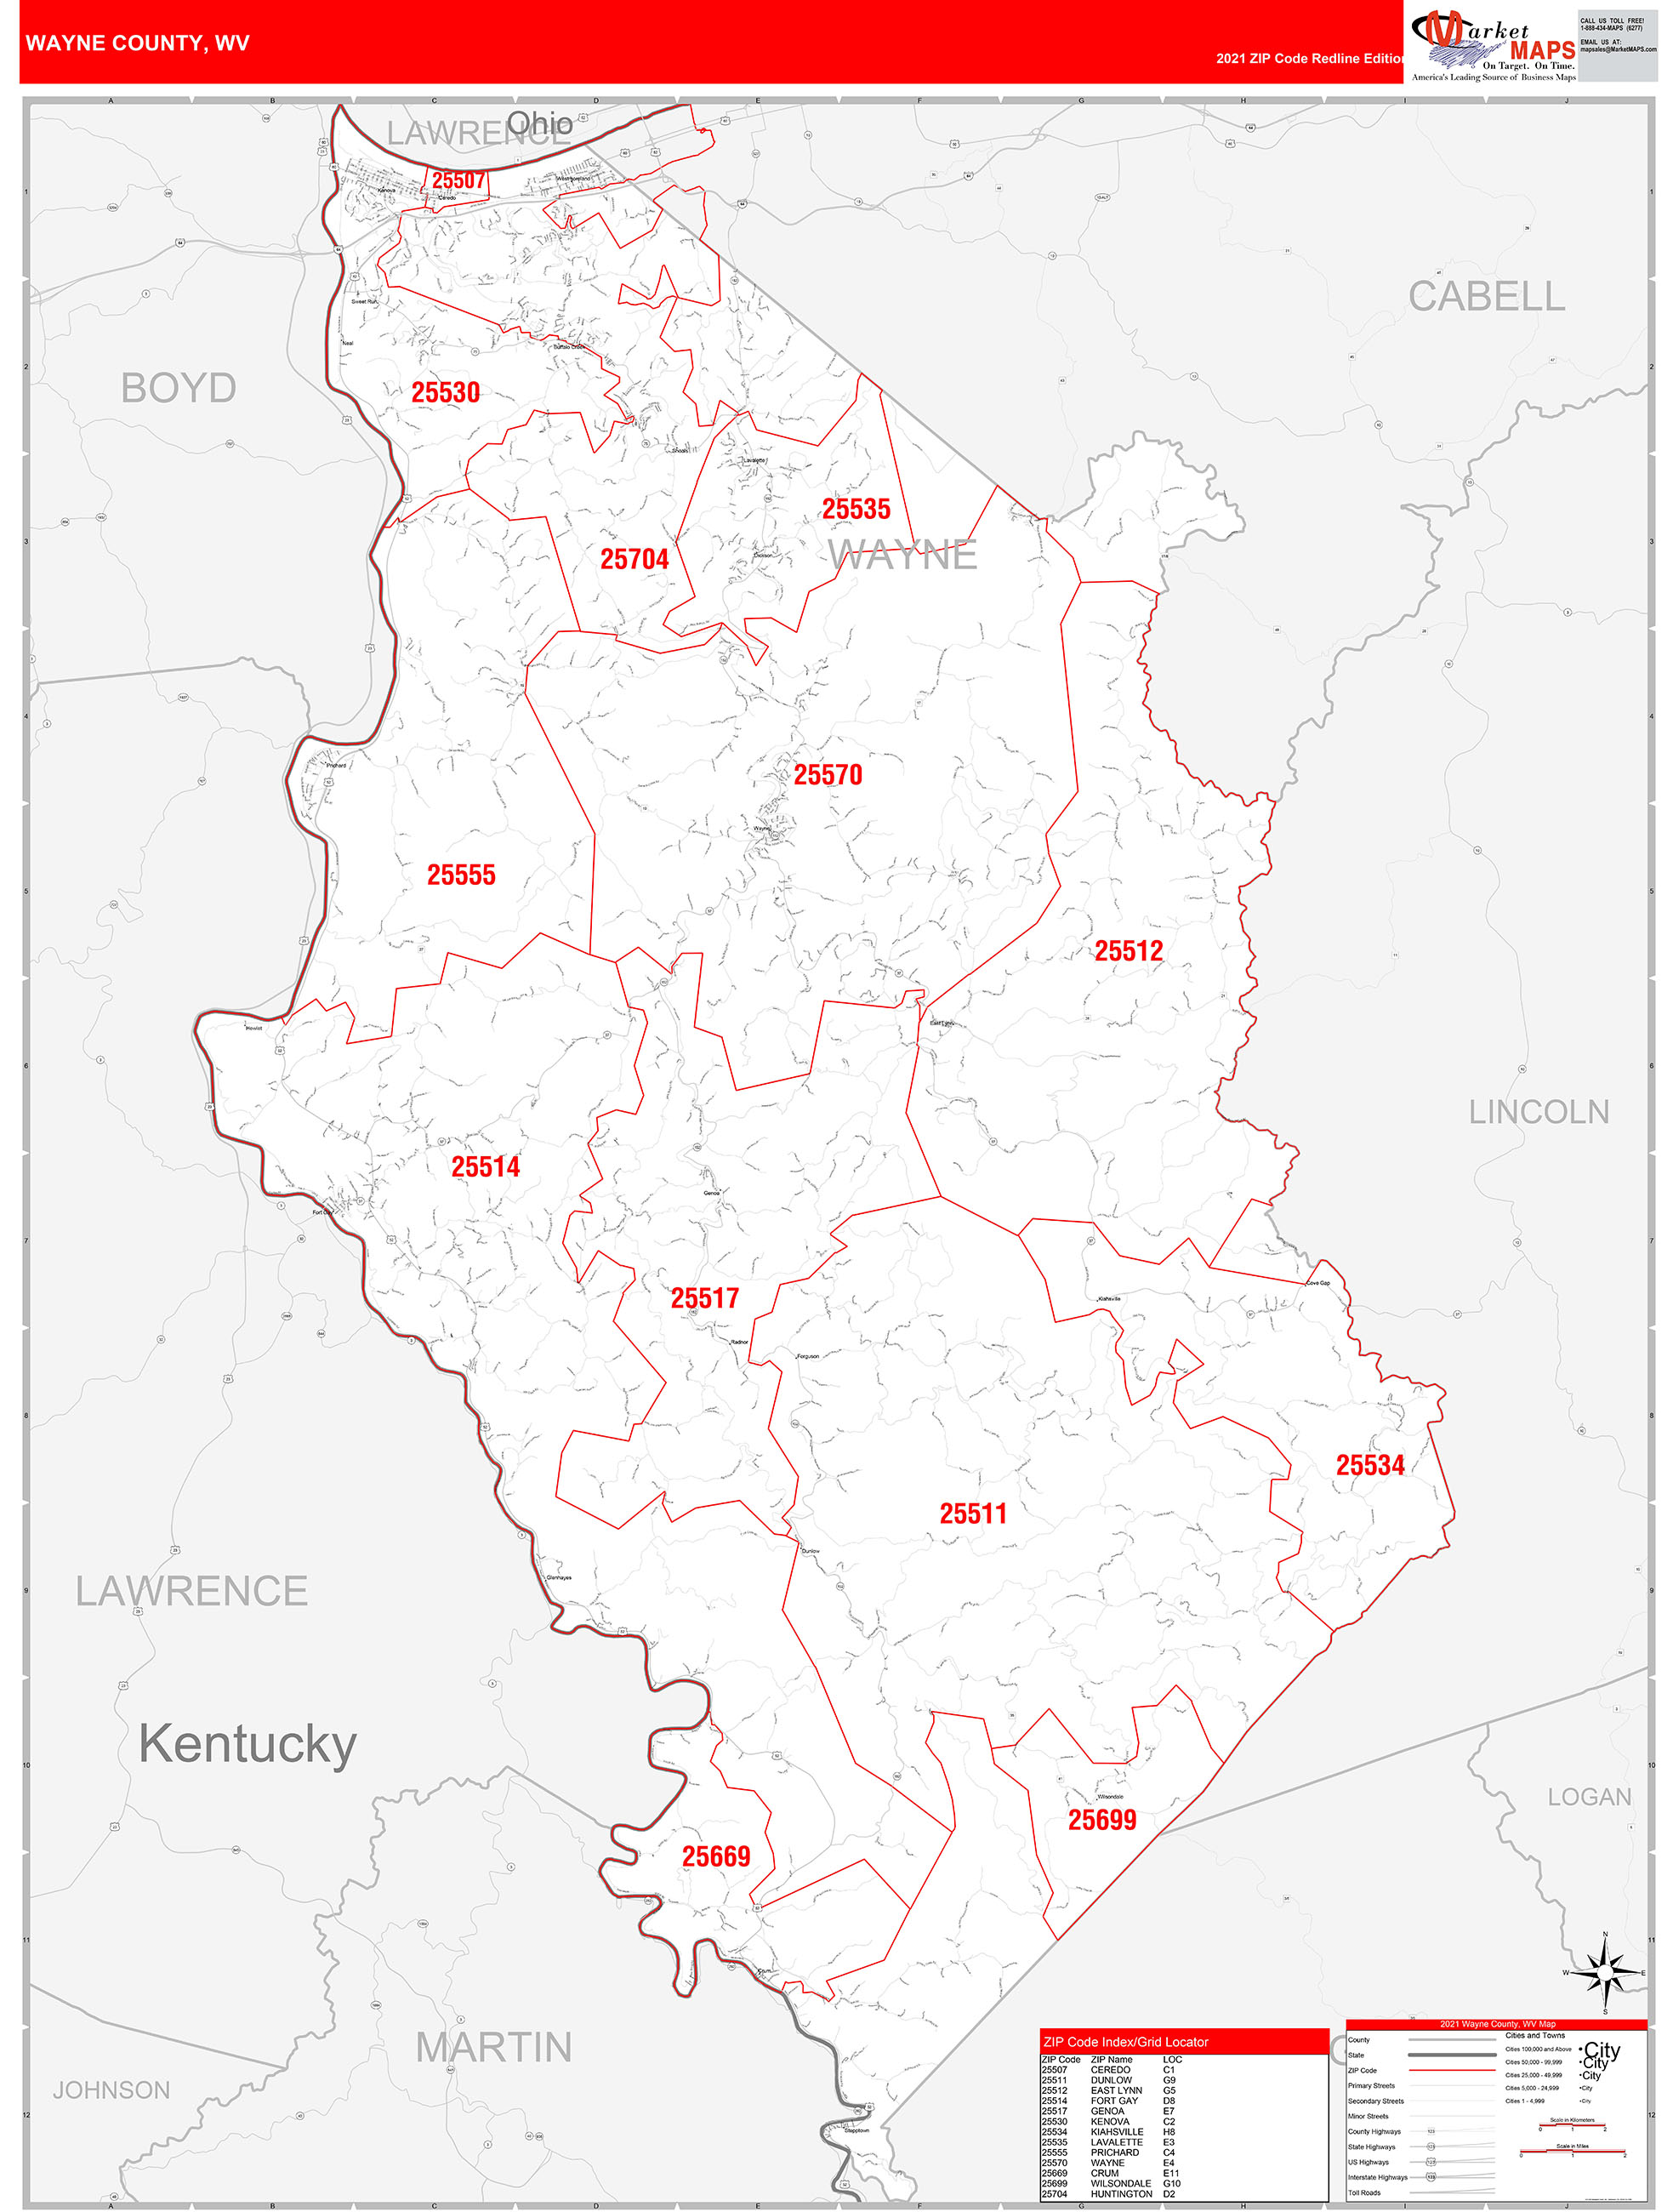 Wayne County, WV Zip Code Wall Map Red Line Style by MarketMAPS